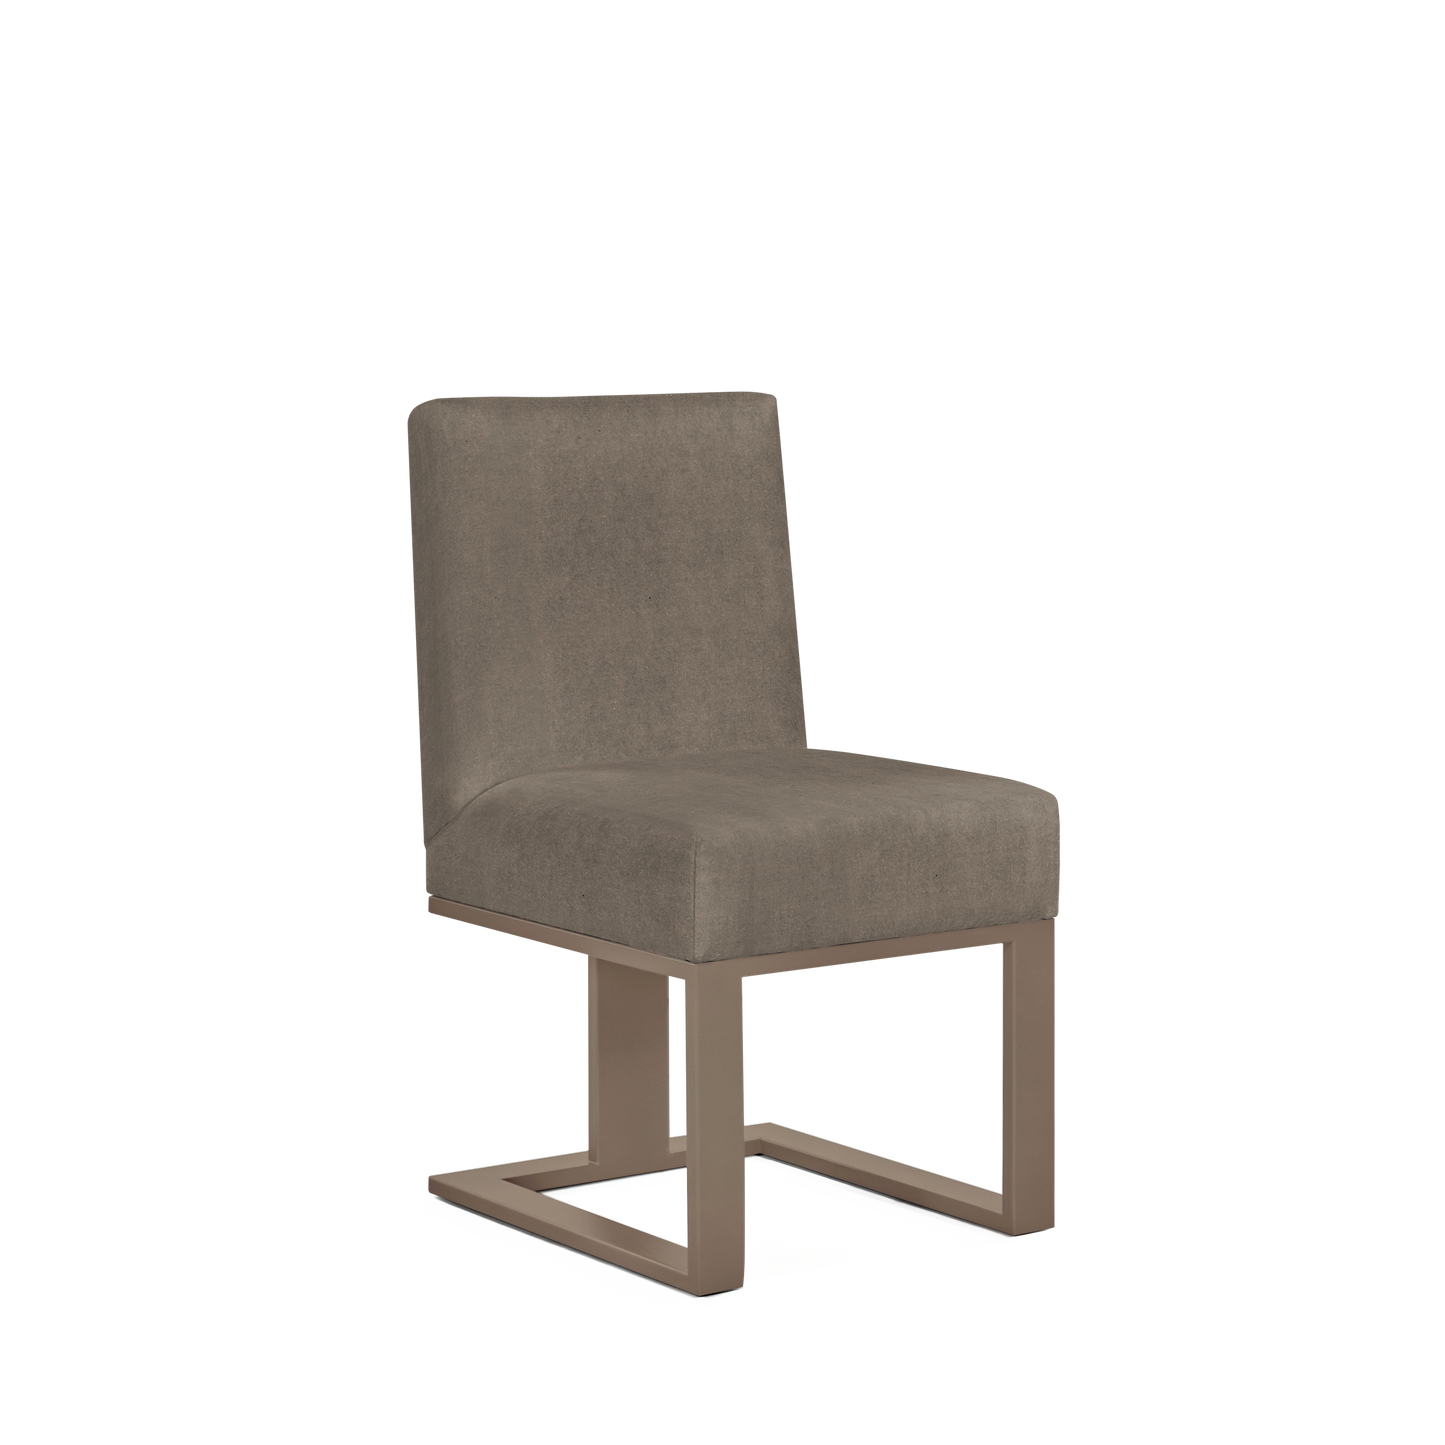 Len chair with suede grey textile and champagne wood legs 